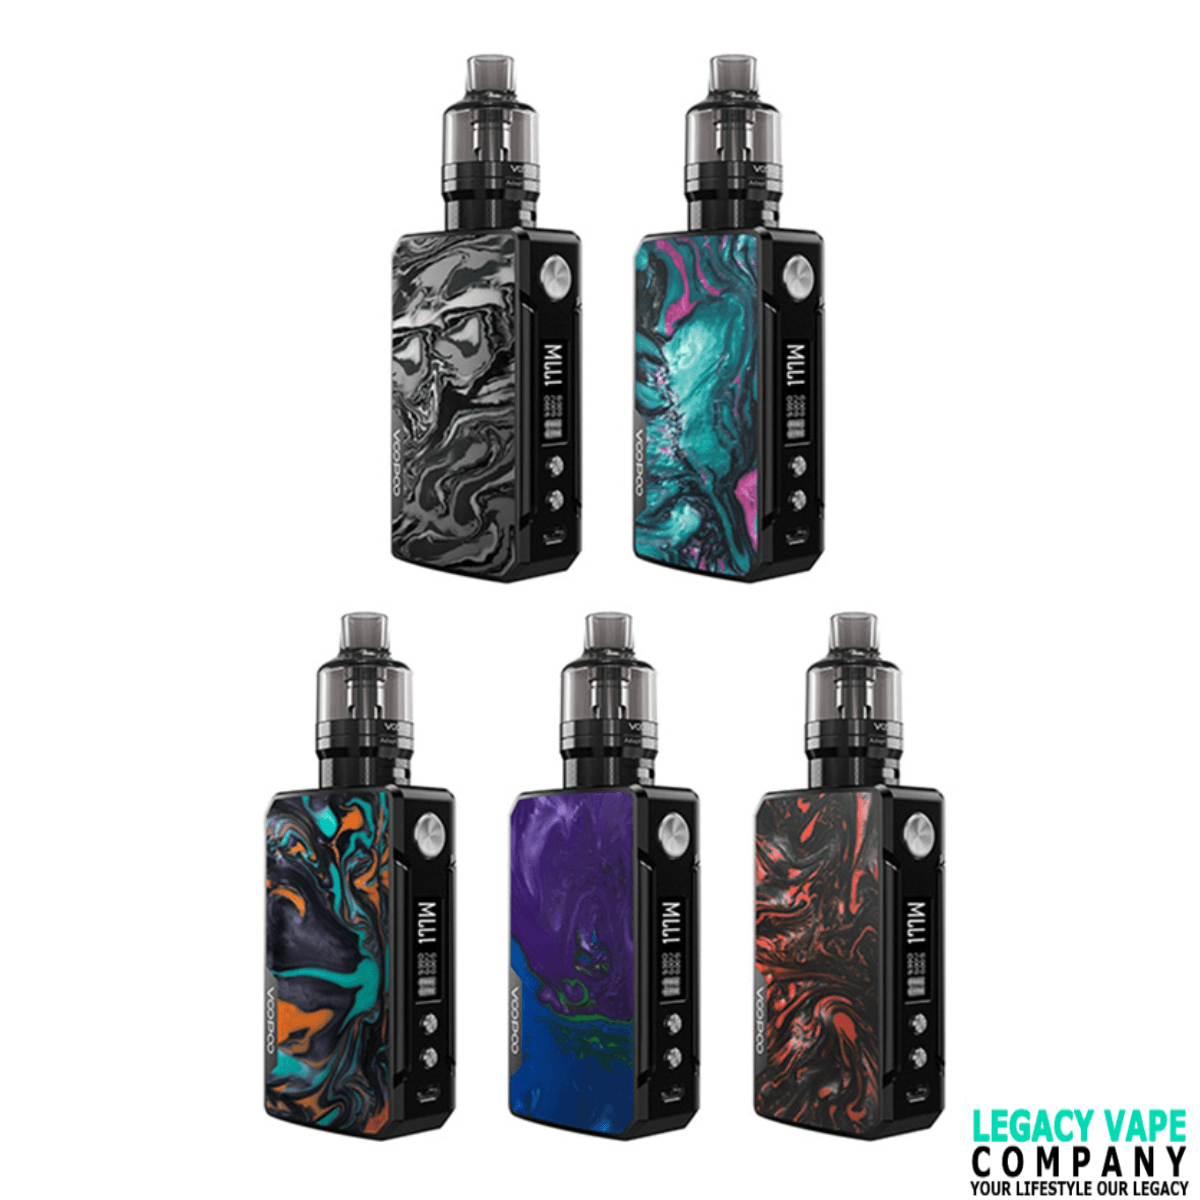 Voopoo Drag 2 Mod Kit With PnP Pod Tank Atomizer 4.5ml (Refresh Edition)